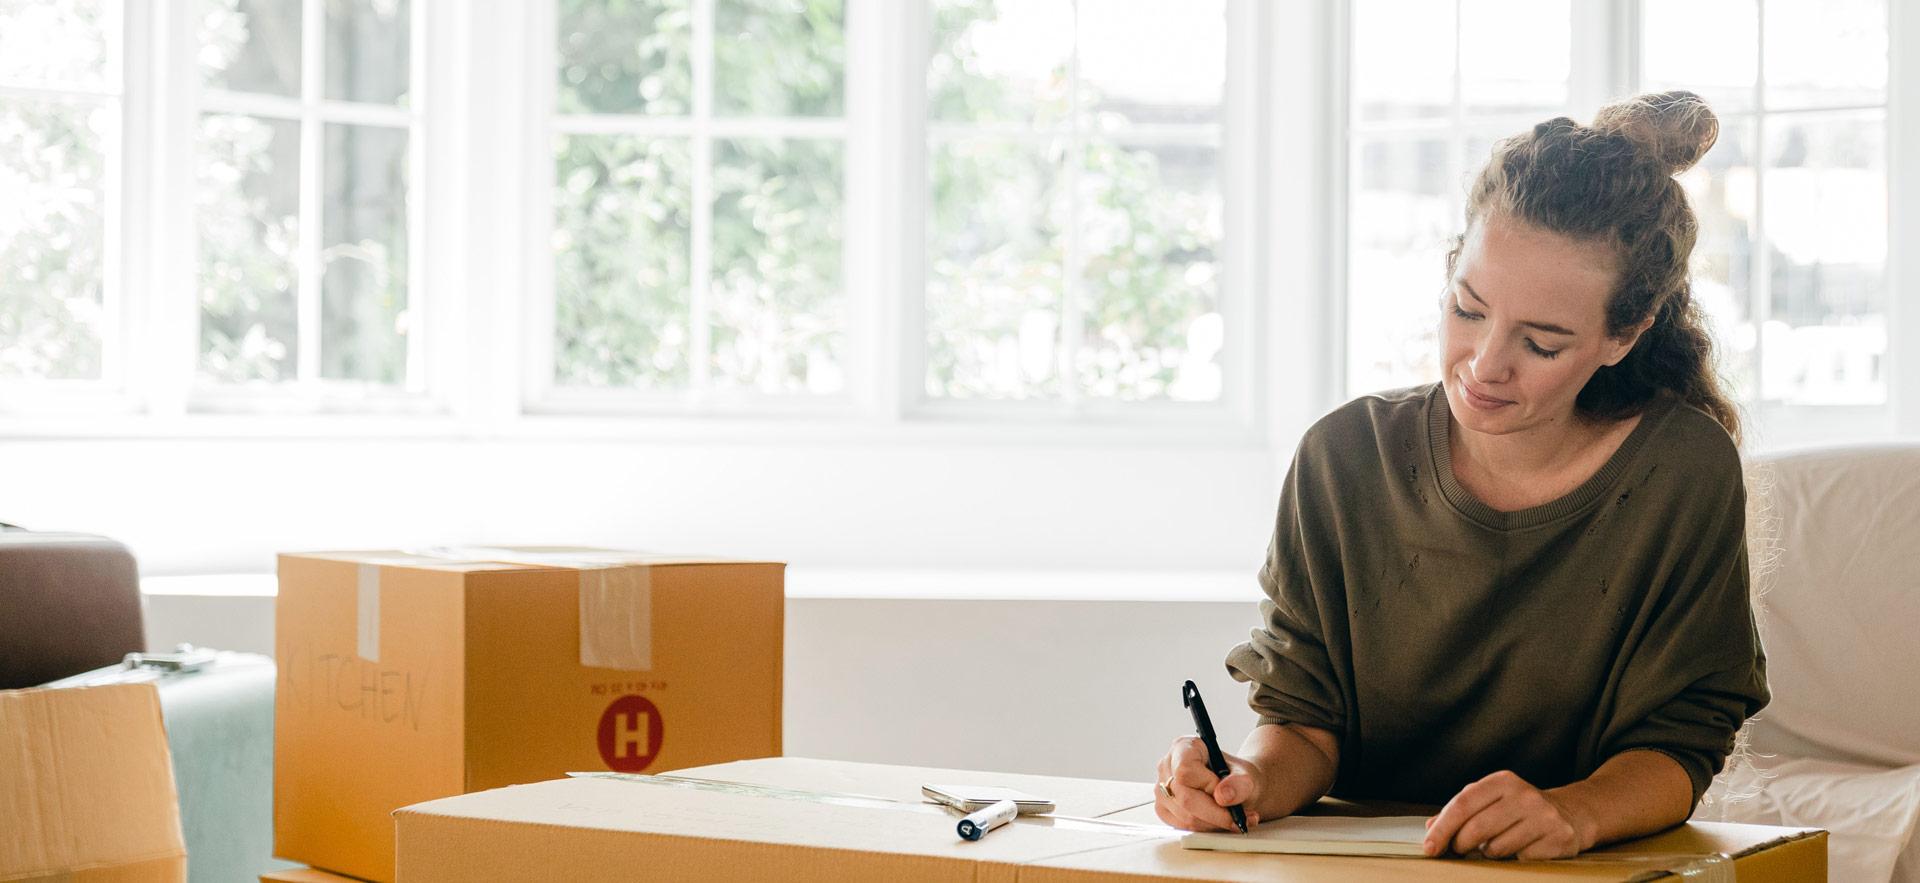 female in a home making notes on a moving box